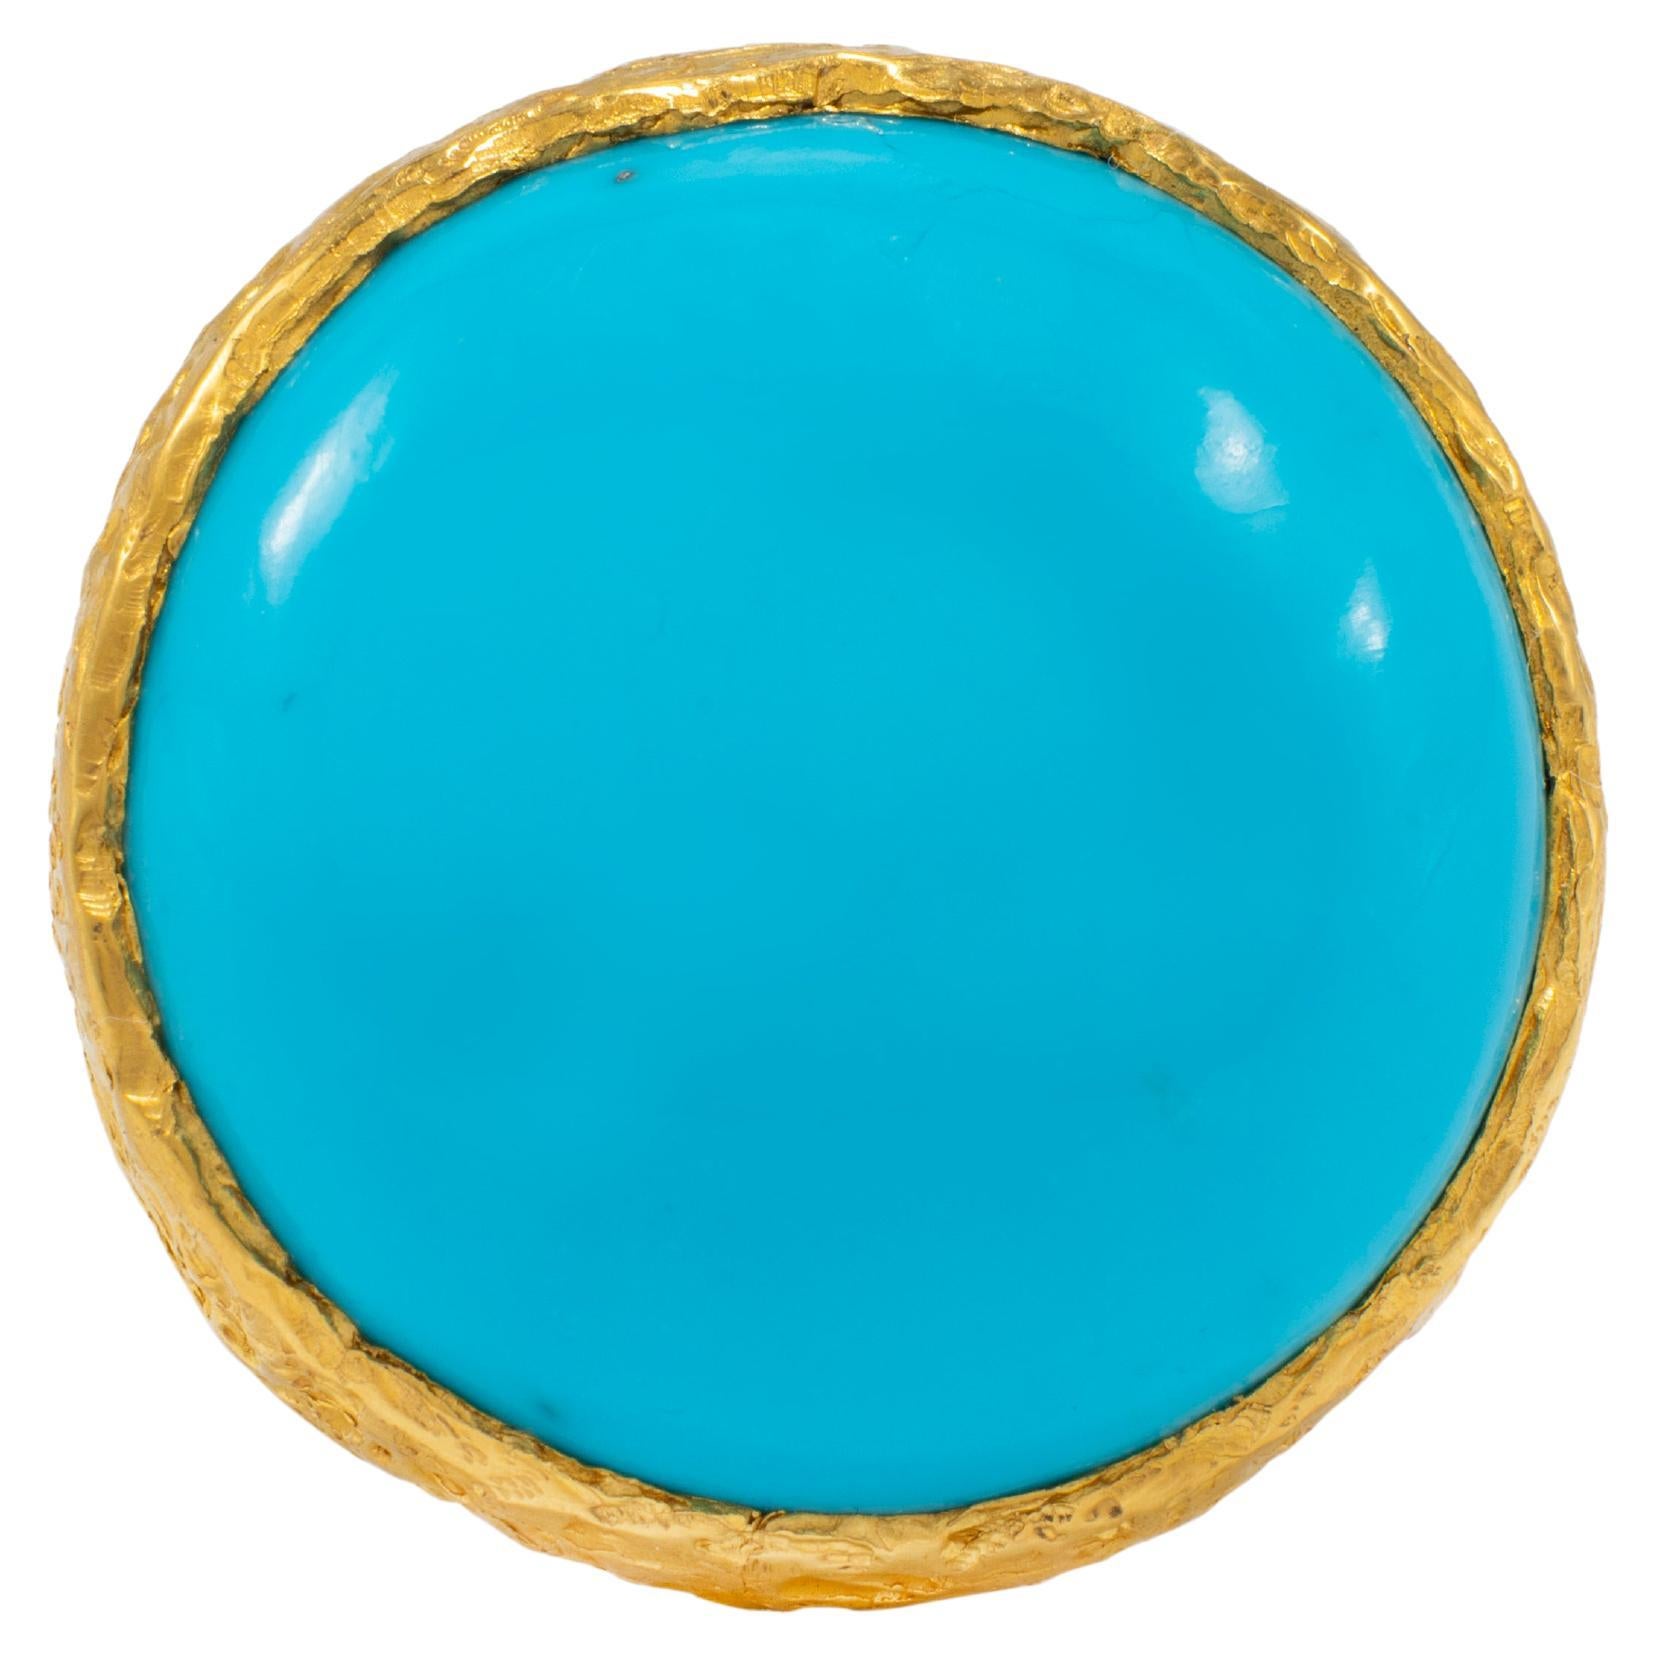 22k Gold Summer Signature Turquoise Cocktail Ring by Tagili